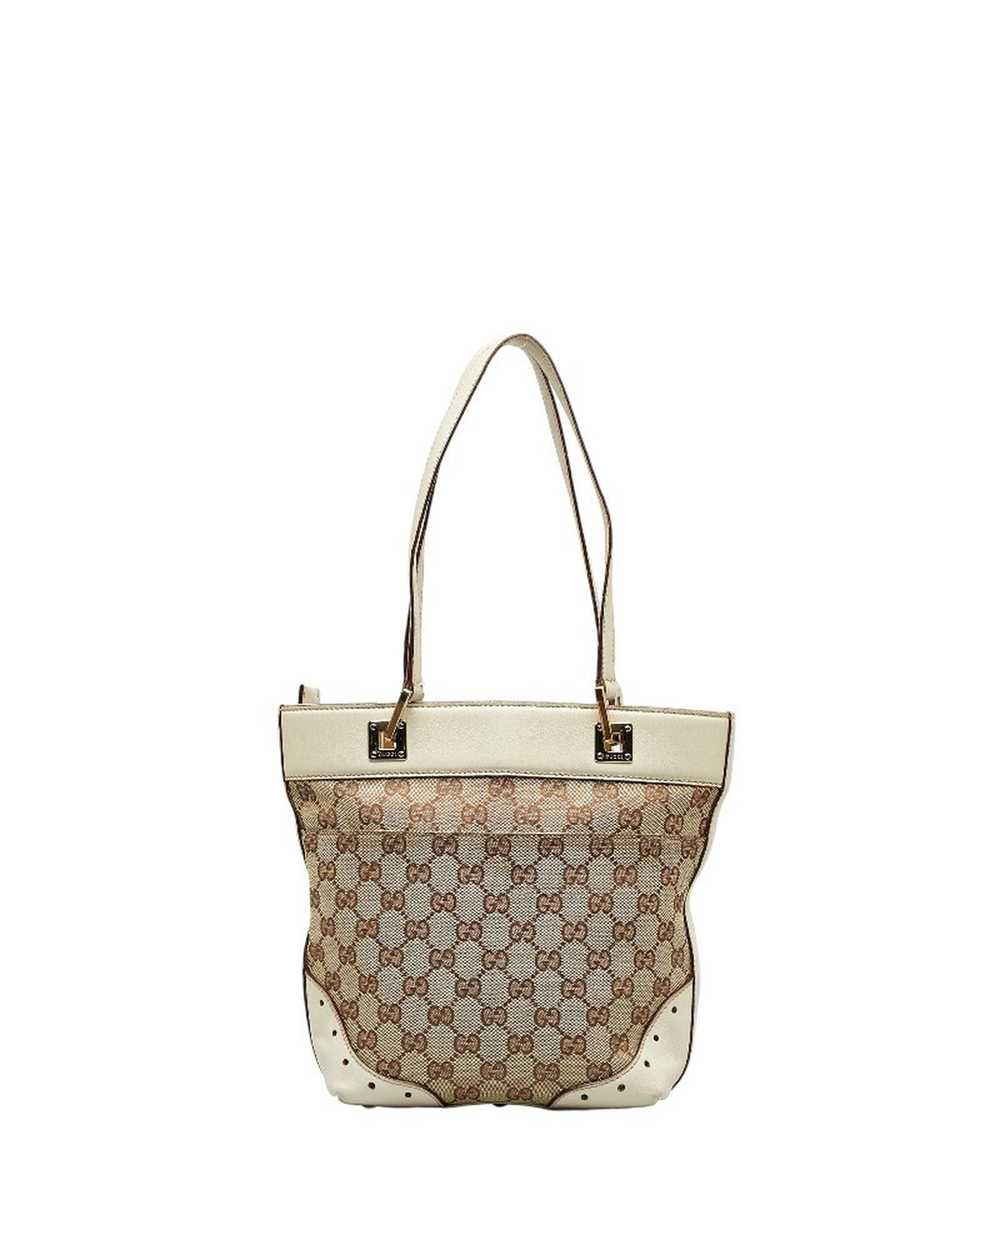 Gucci Canvas Tote Bag in Brown with Signature GG … - image 3